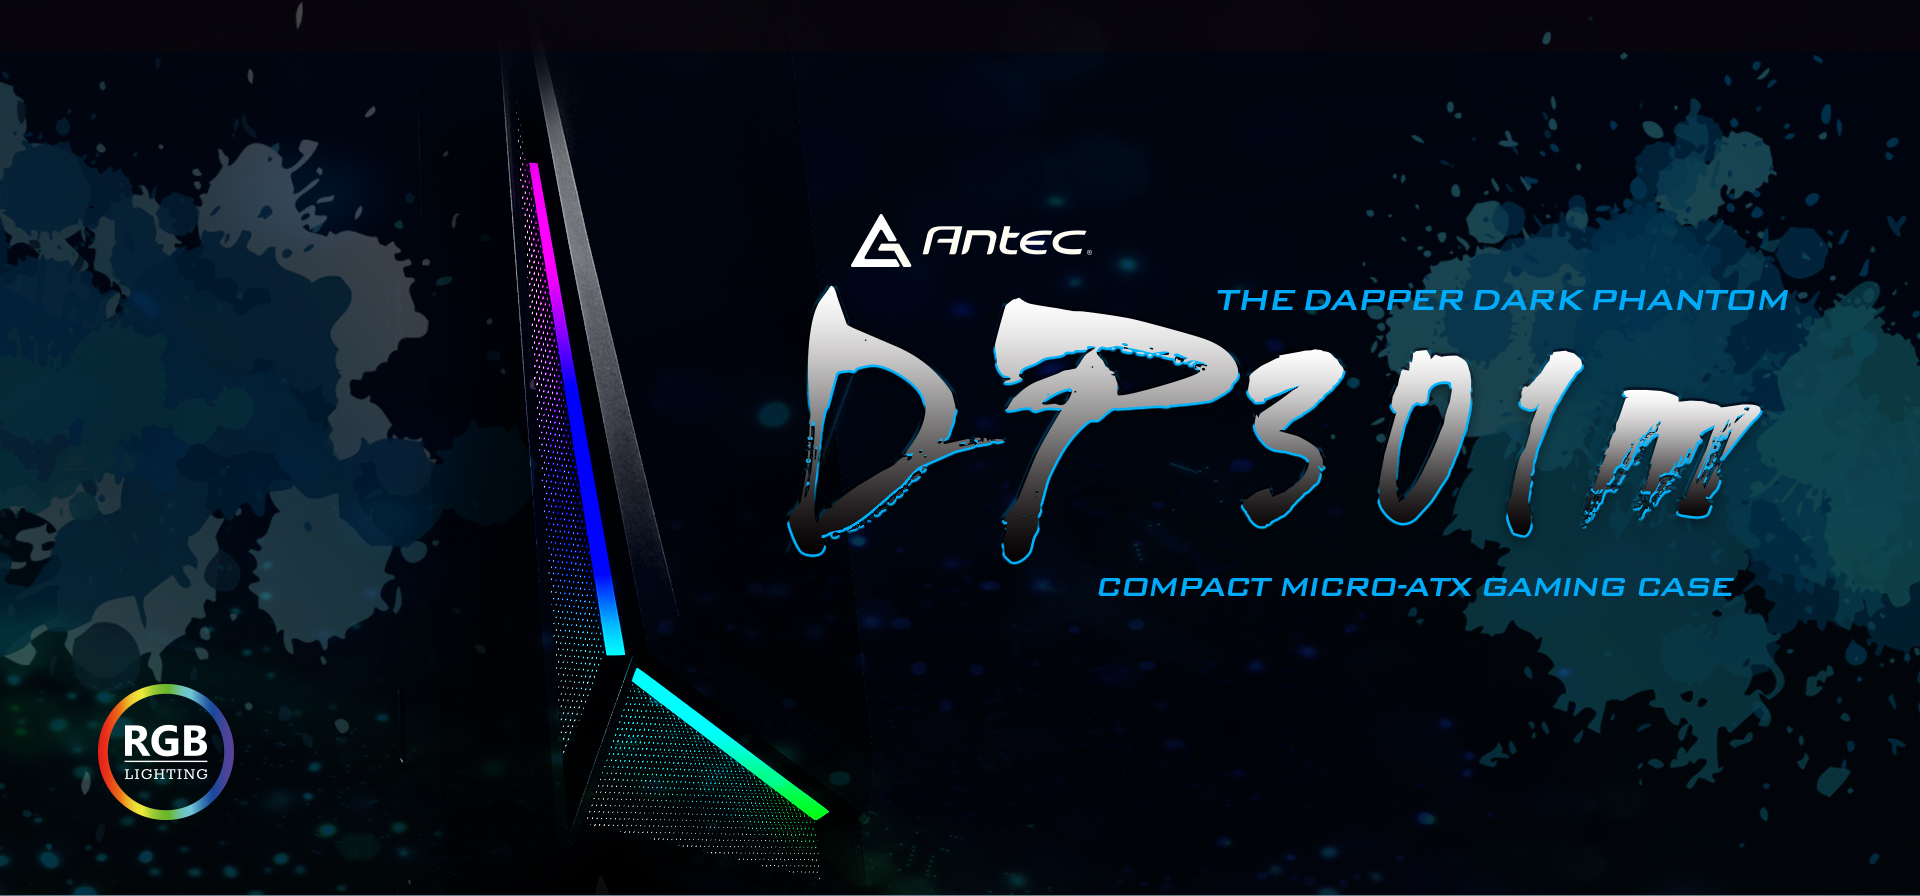 Antec DP301m banner showing the banner facing down to the left, along with text that reads: THE DAPPER DARK PHANTOM - COMPACT MICRO-ATX GAMING CASE. The RGB LIGHTING logo is in the bottom-left of this image